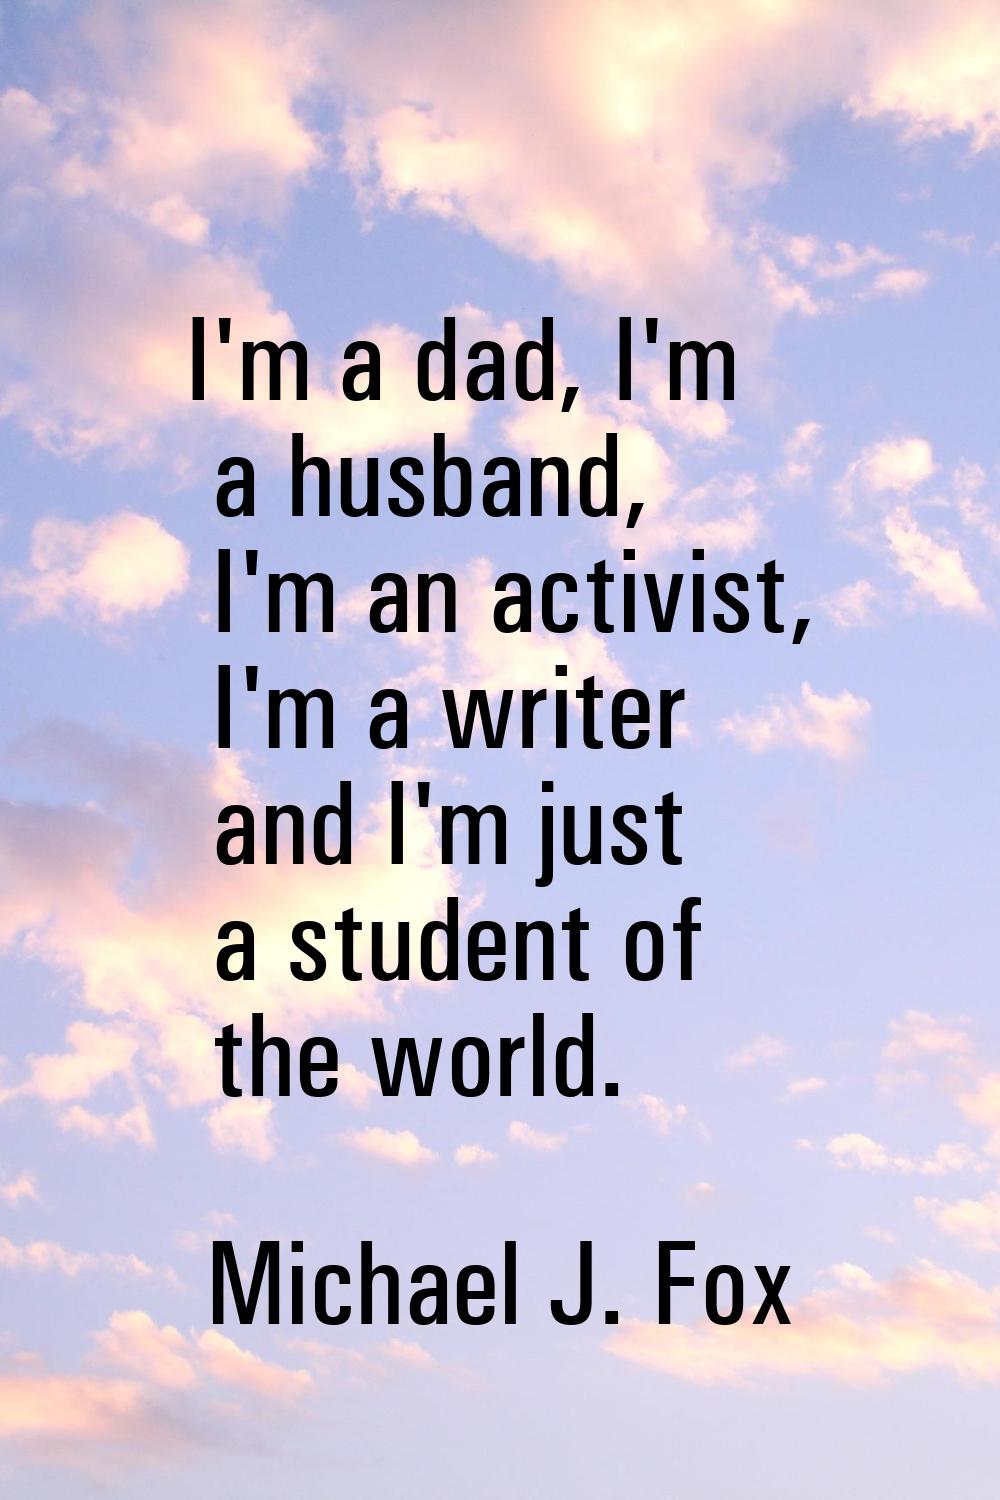 I'm a dad, I'm a husband, I'm an activist, I'm a writer and I'm just a student of the world.